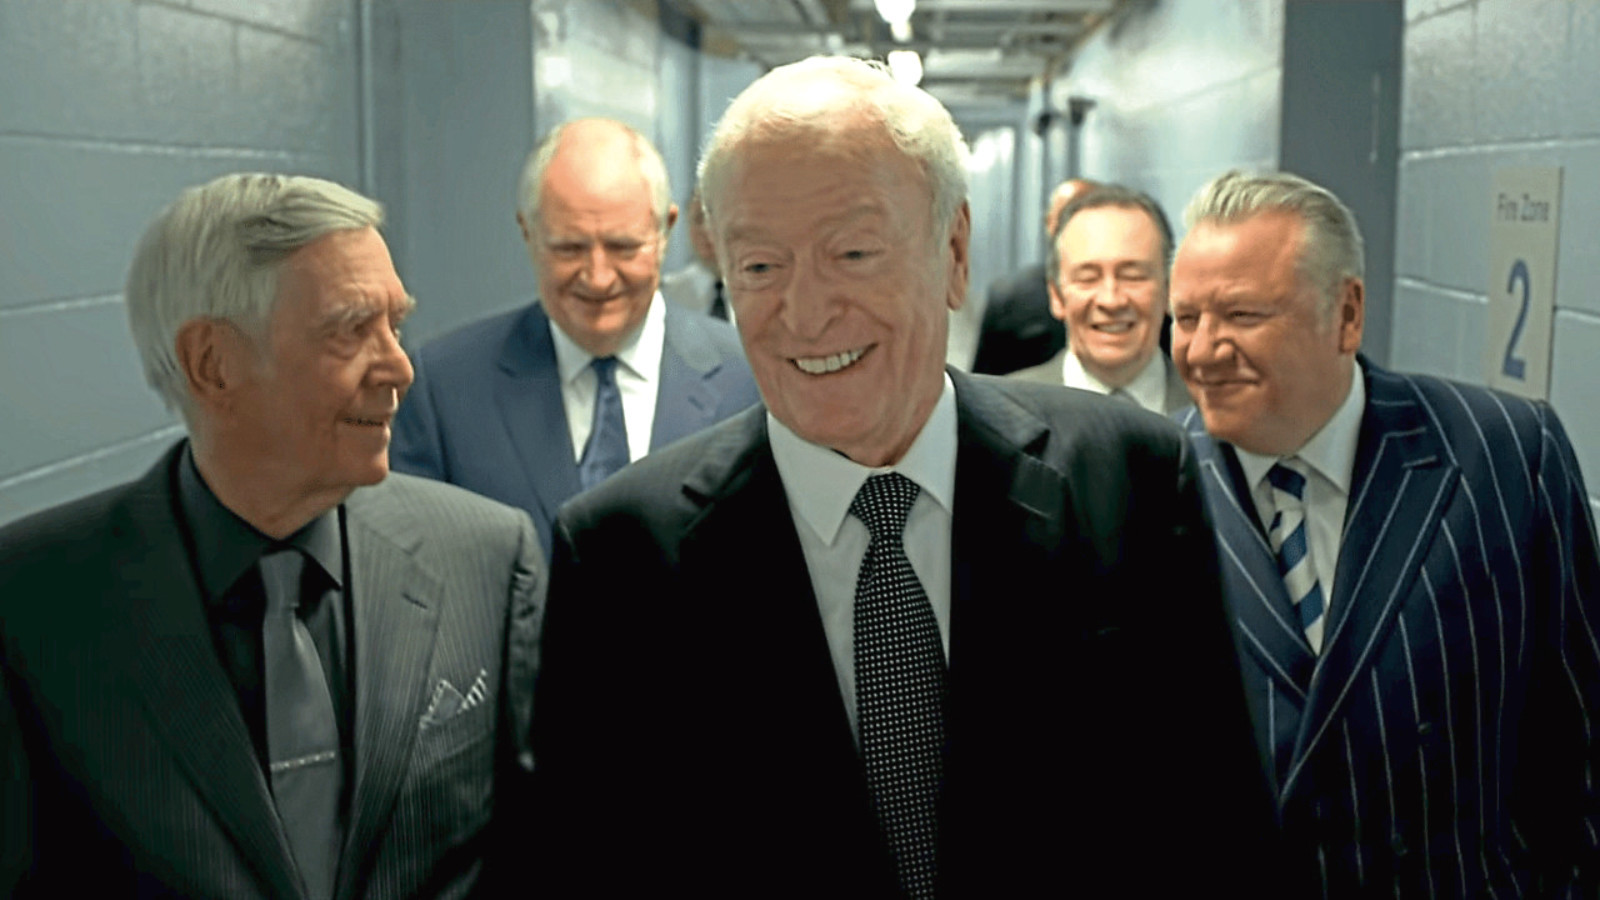 King of Thieves has a cast of British acting royalty